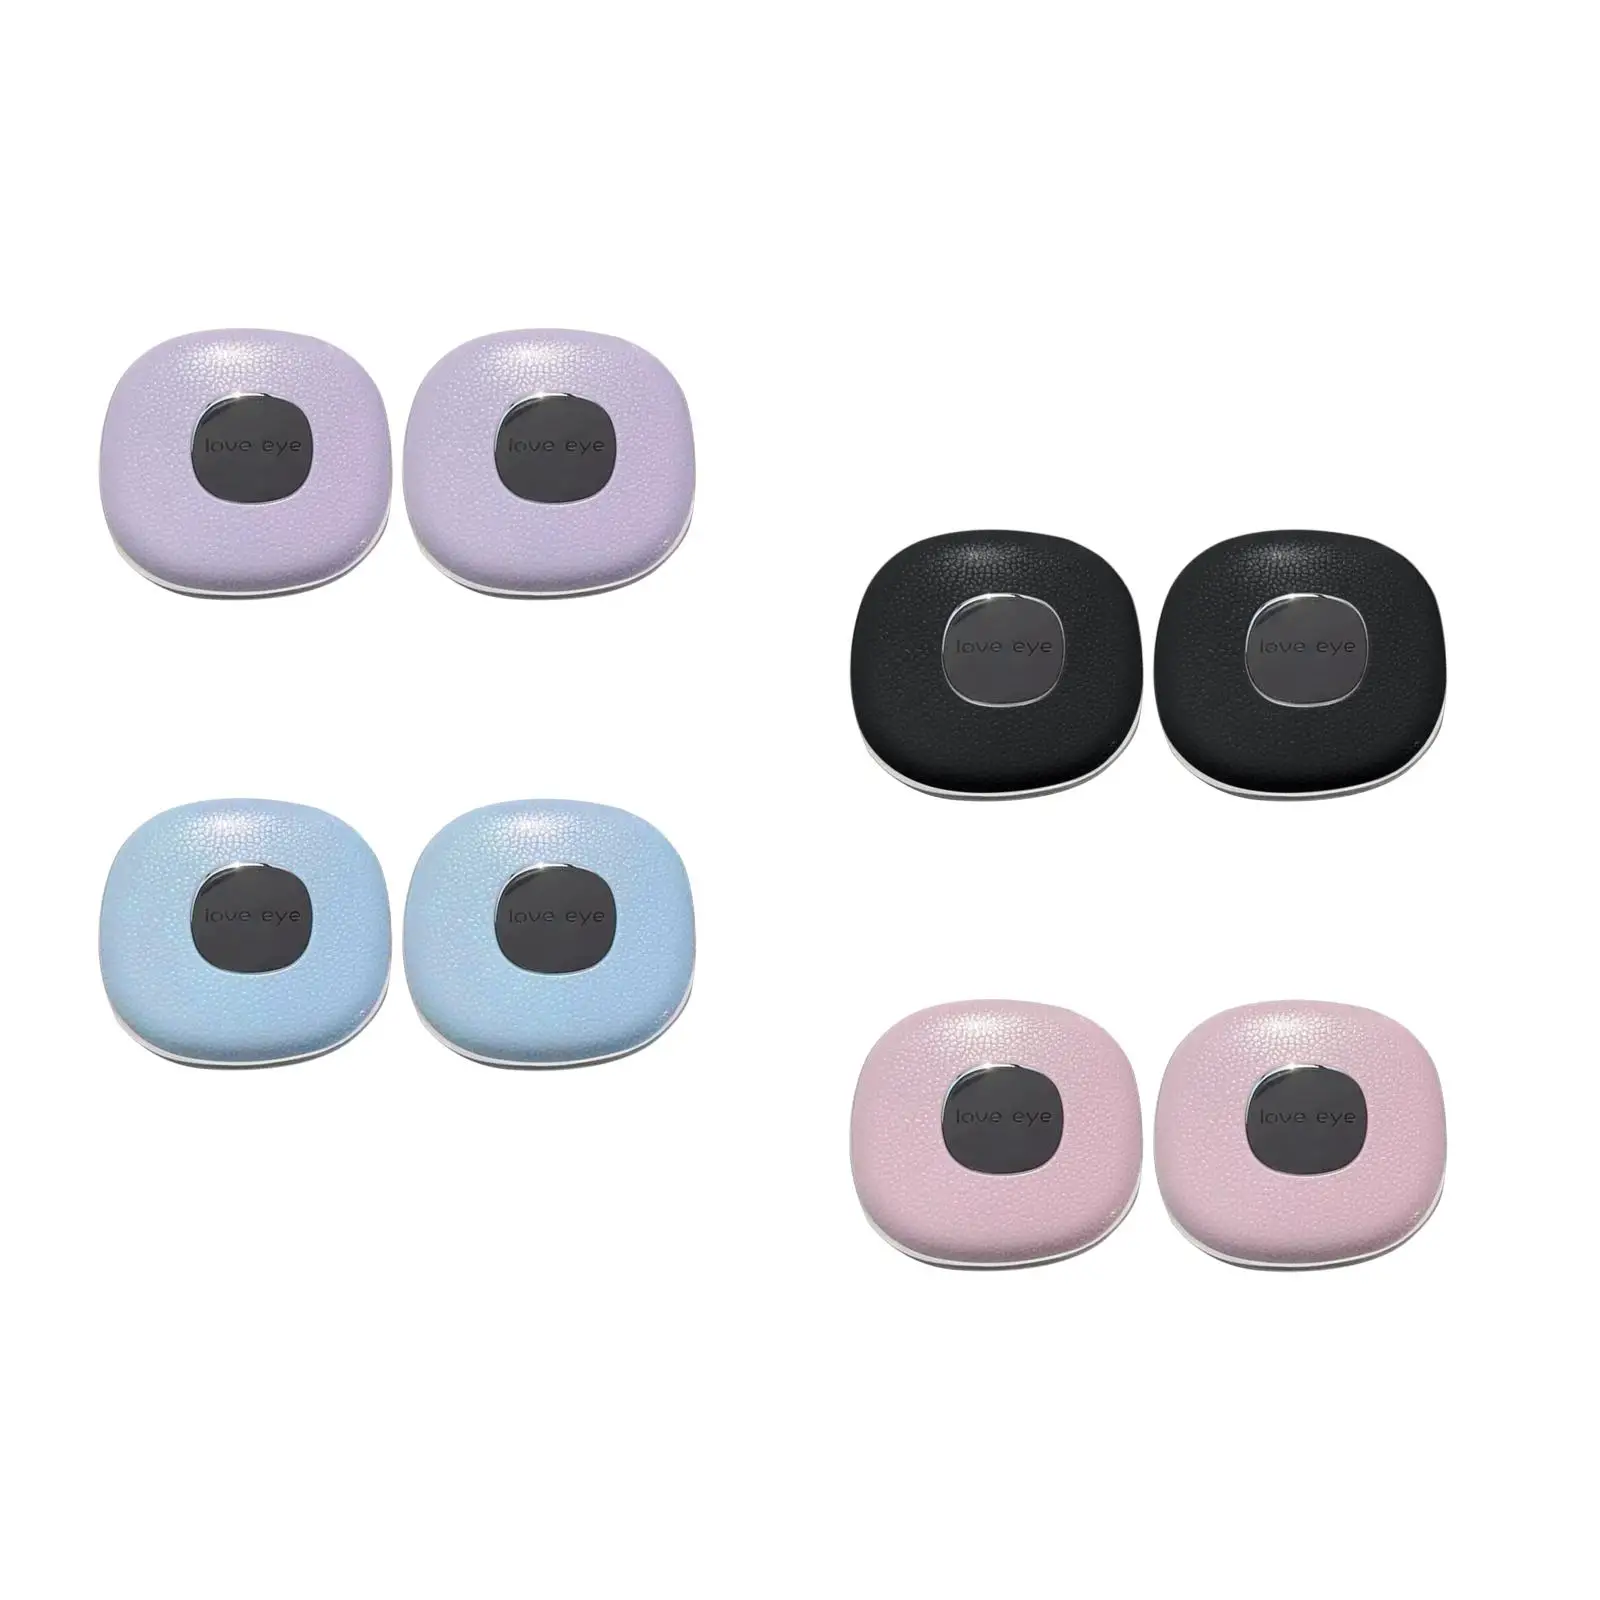 2 Pieces Contact Lens Case Simple Contact Lens Container for Women and Girls